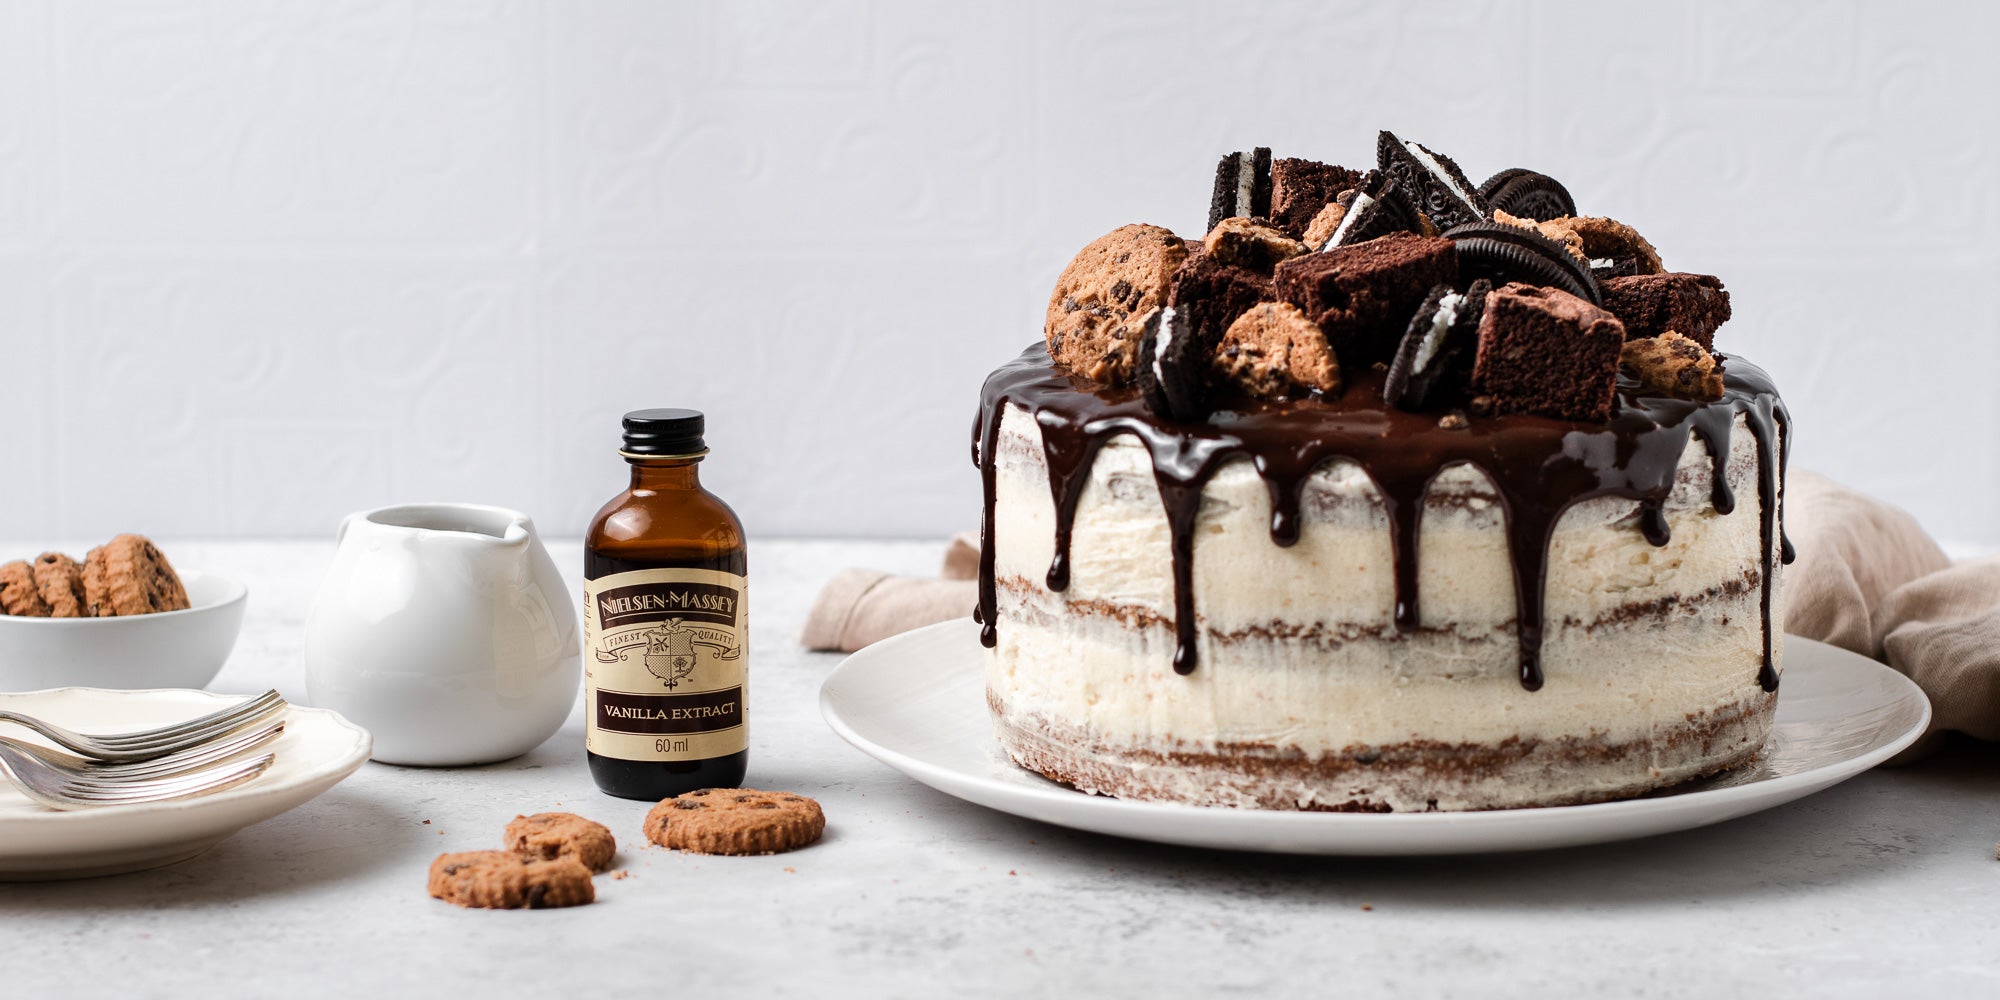 Cookie, Oreo & Brownie Layered Cake with chocolate drip, next to a bottle of Neilsen-Massey vanilla extract